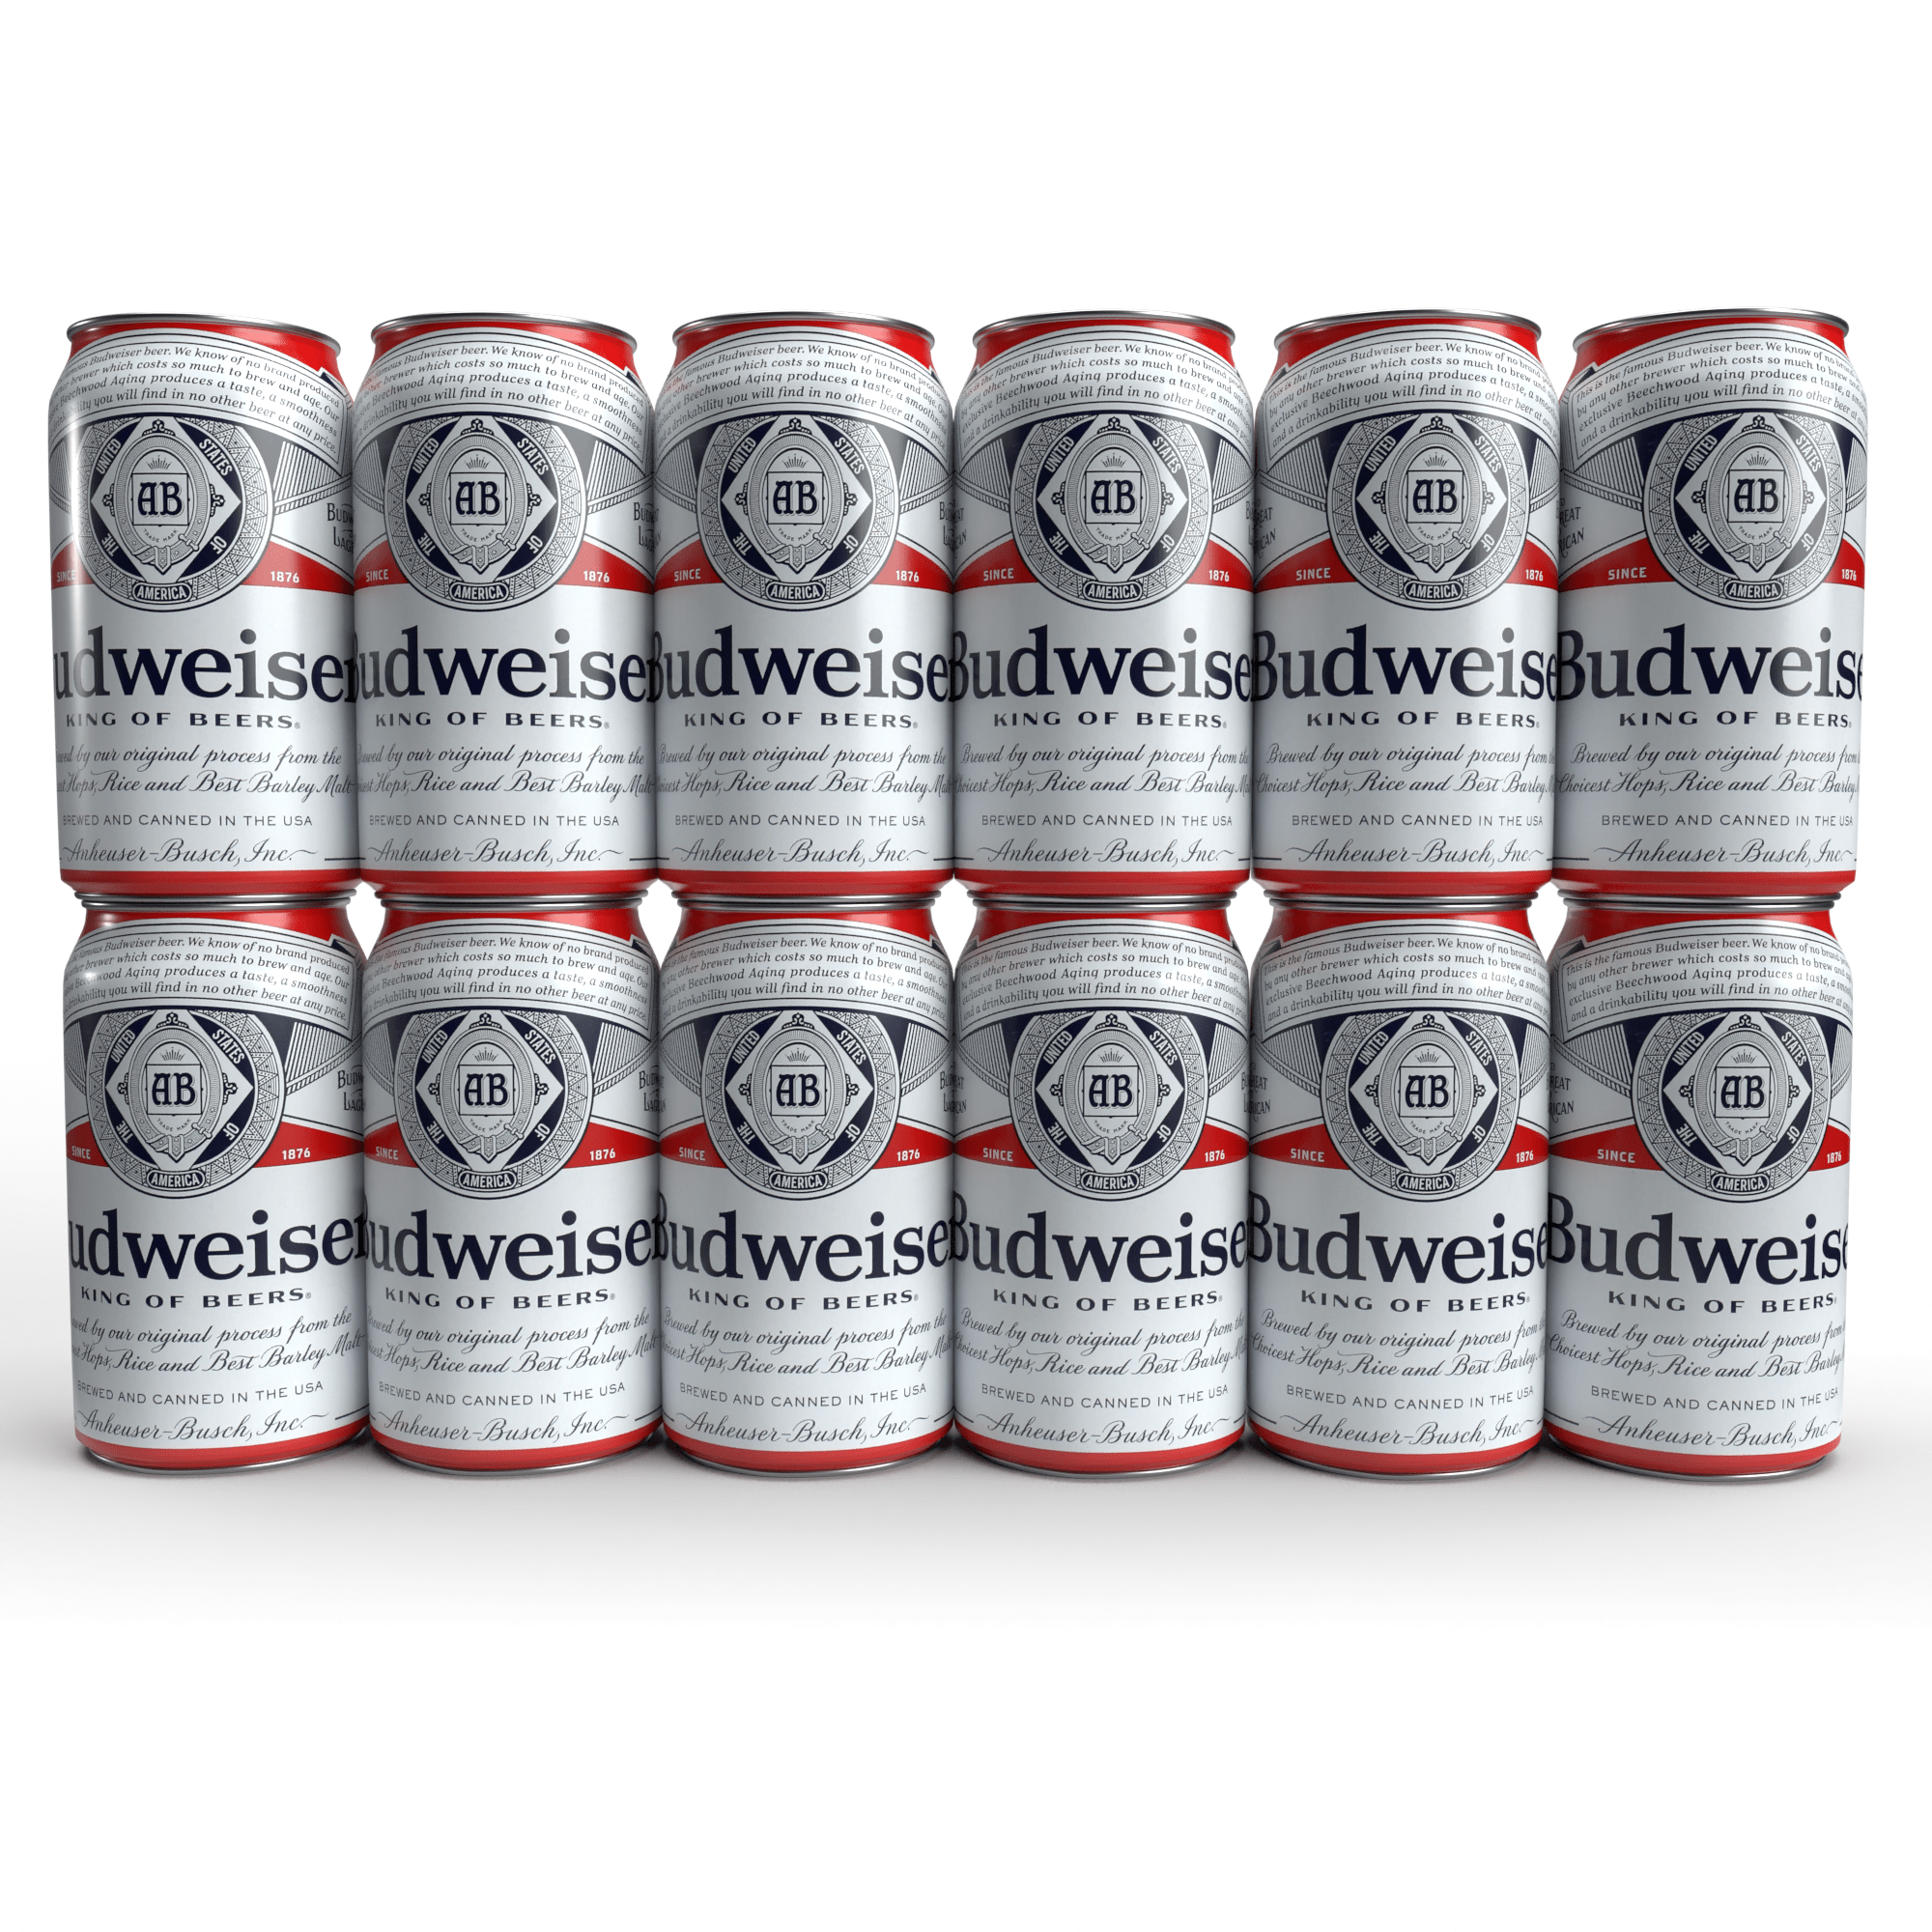 Budweiser Lager Beer Cans 10 x 440ml | Beer | Iceland Foods